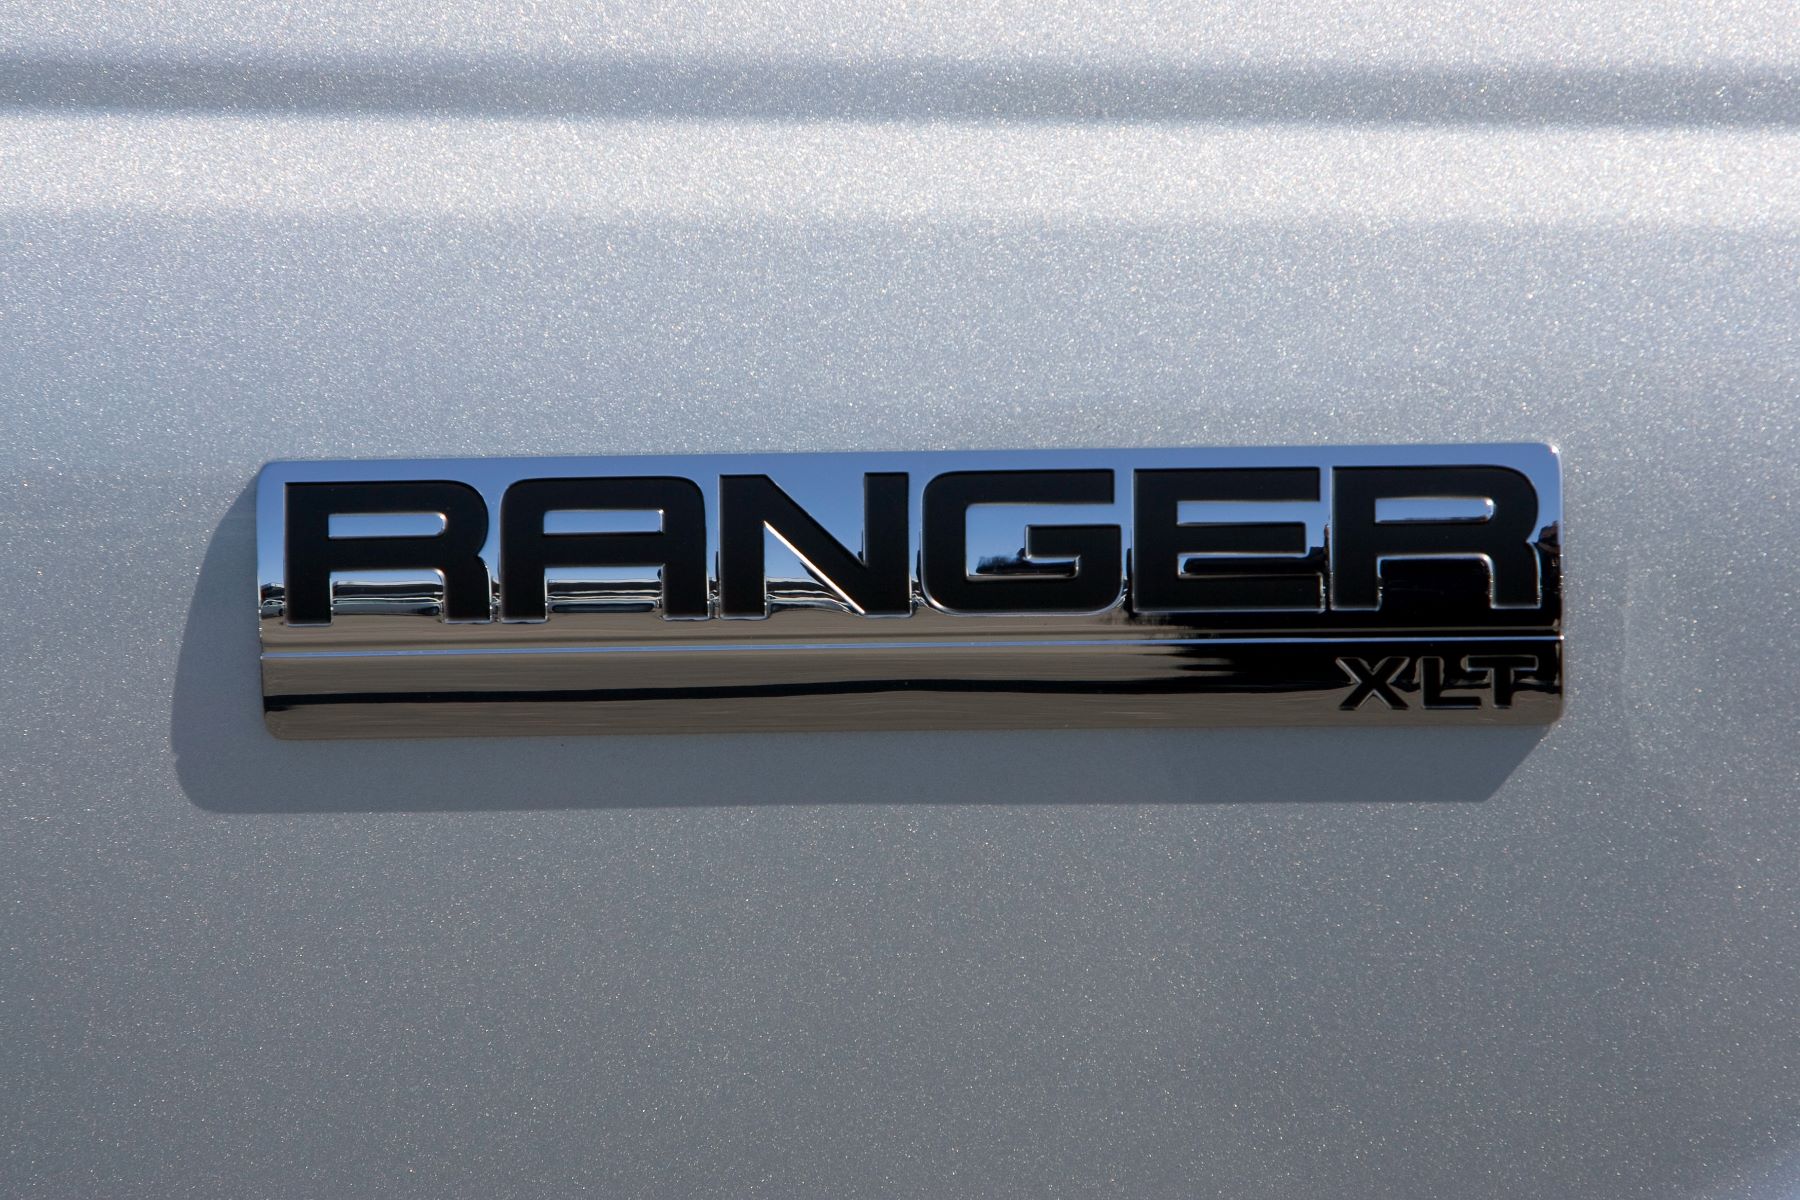 The badging on a Ford Ranger XLT model at the Serramonte Ford dealership in Colma, California